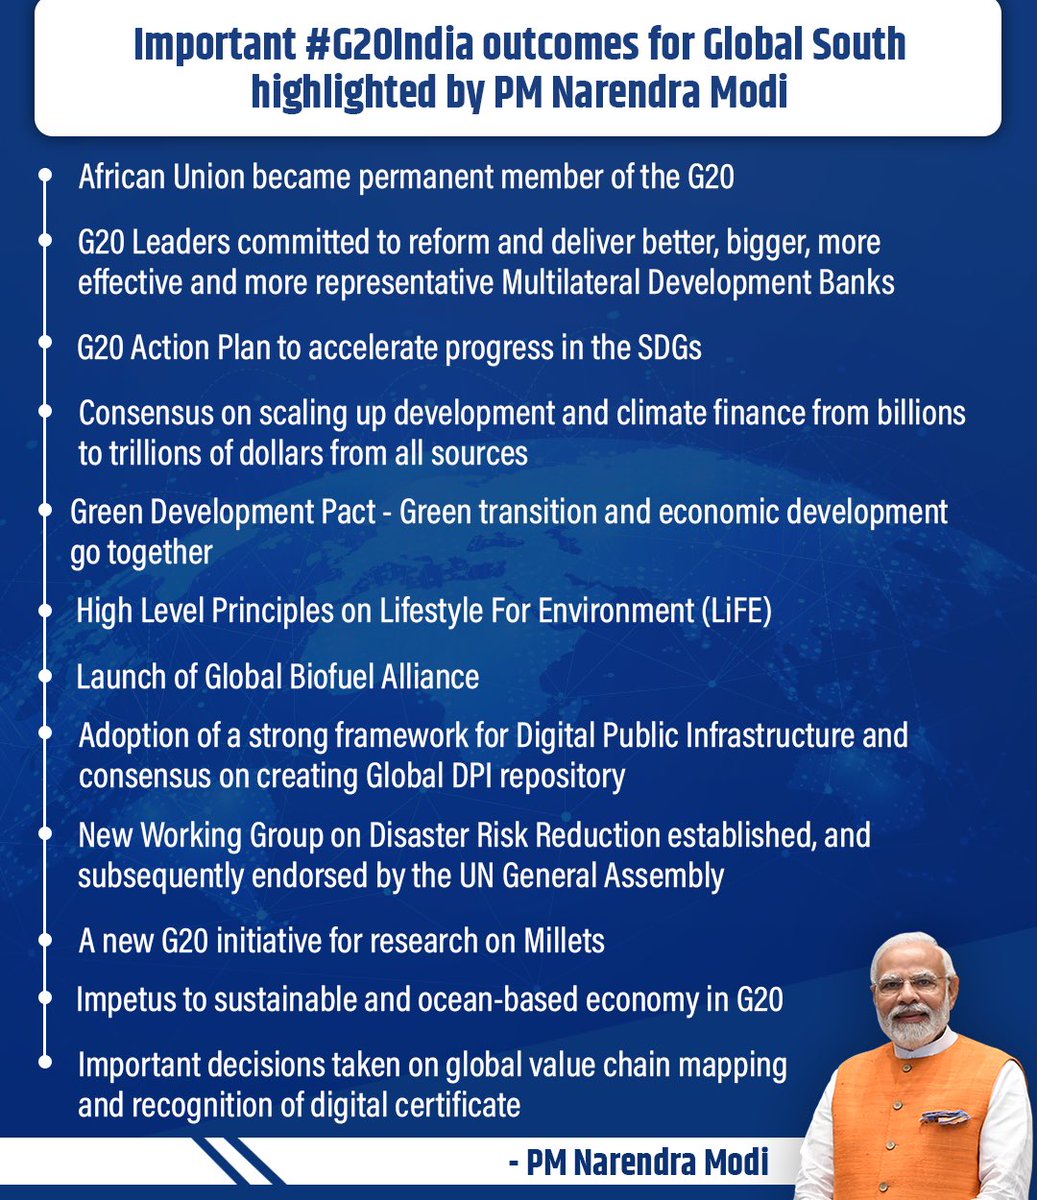 👇Take a look at the key #G20India outcomes for Global South highlighted by the PM.